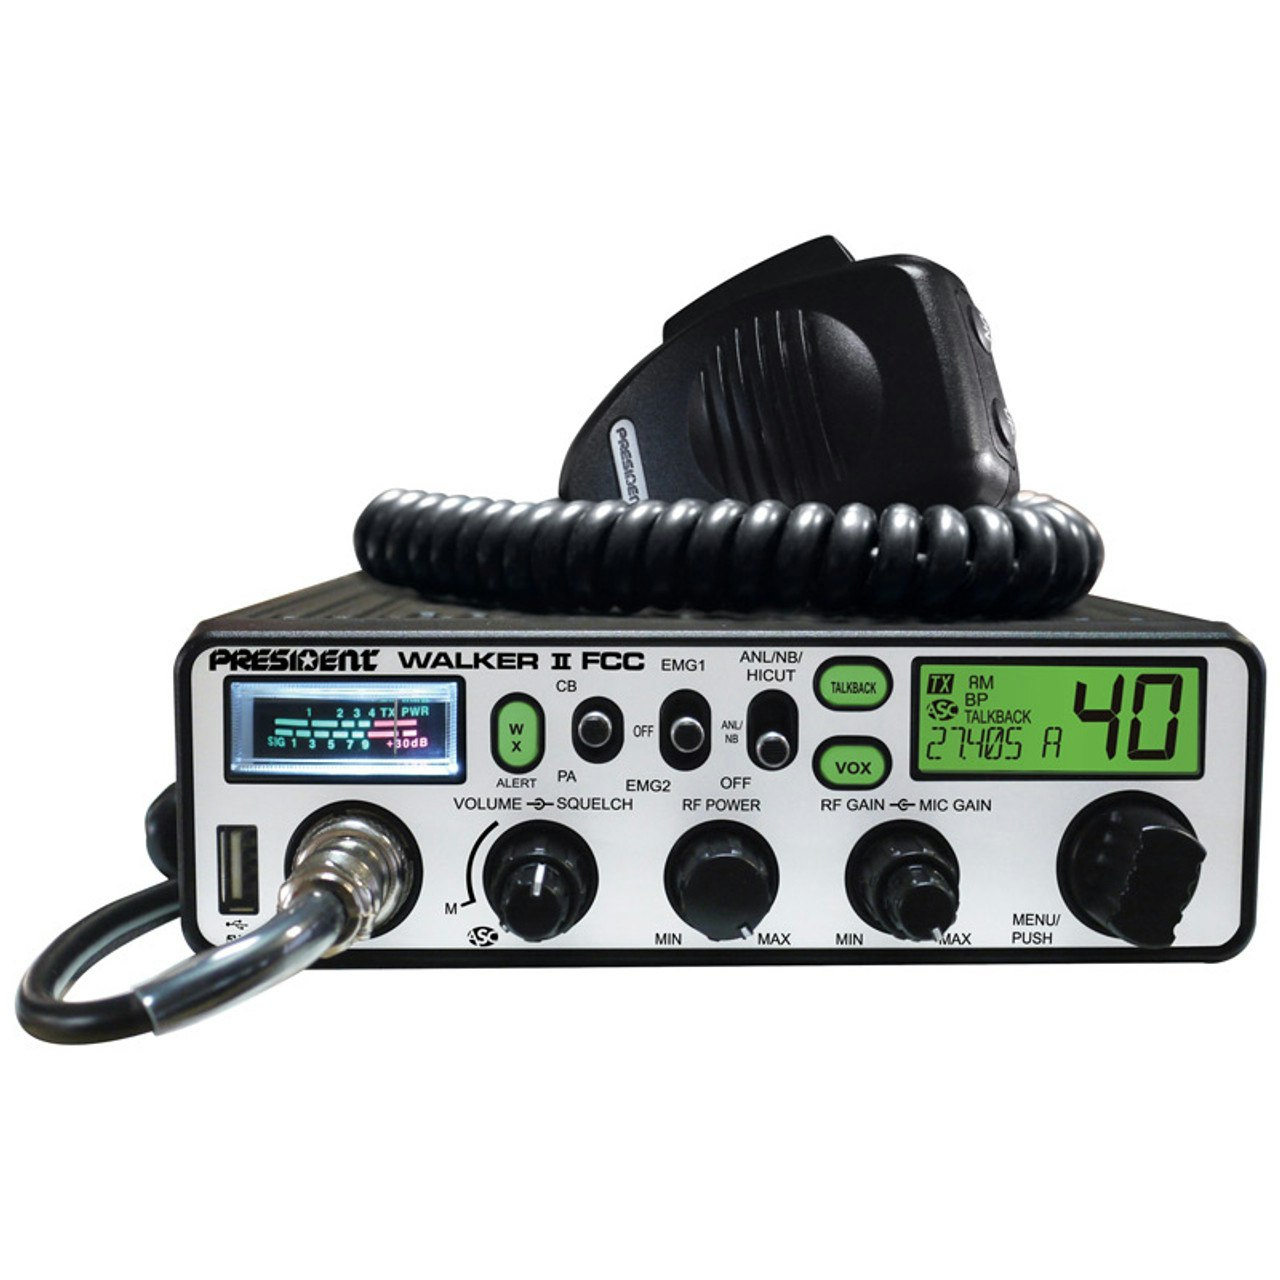 dood Glad Respect Walker II FCC 40 Channel CB Radio With Weather Alerts And SWR Meter By  President - Raney's Truck Parts